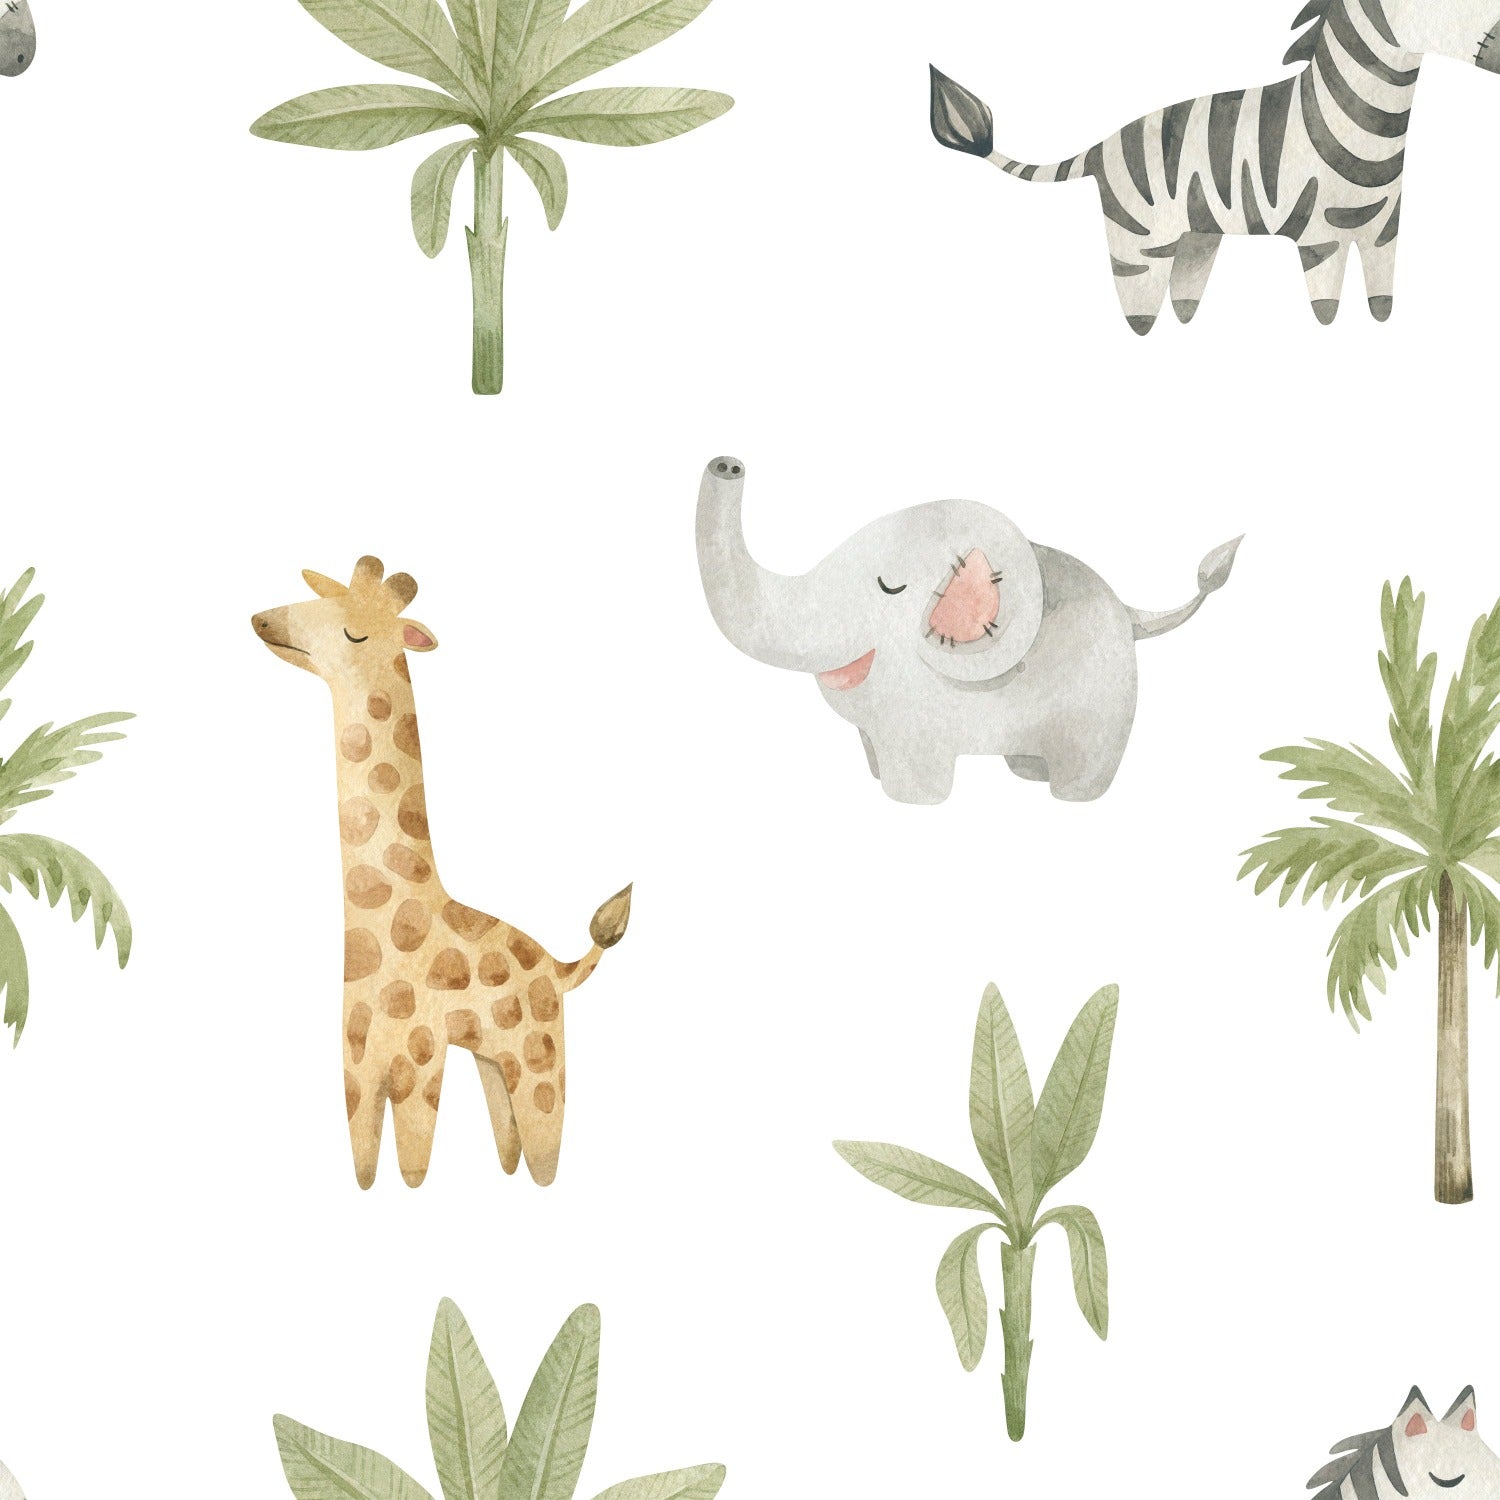 A whimsical wallpaper design with watercolor jungle animals such as a smiling elephant, a long-necked giraffe, and a striped zebra interspersed with tropical foliage on a white background